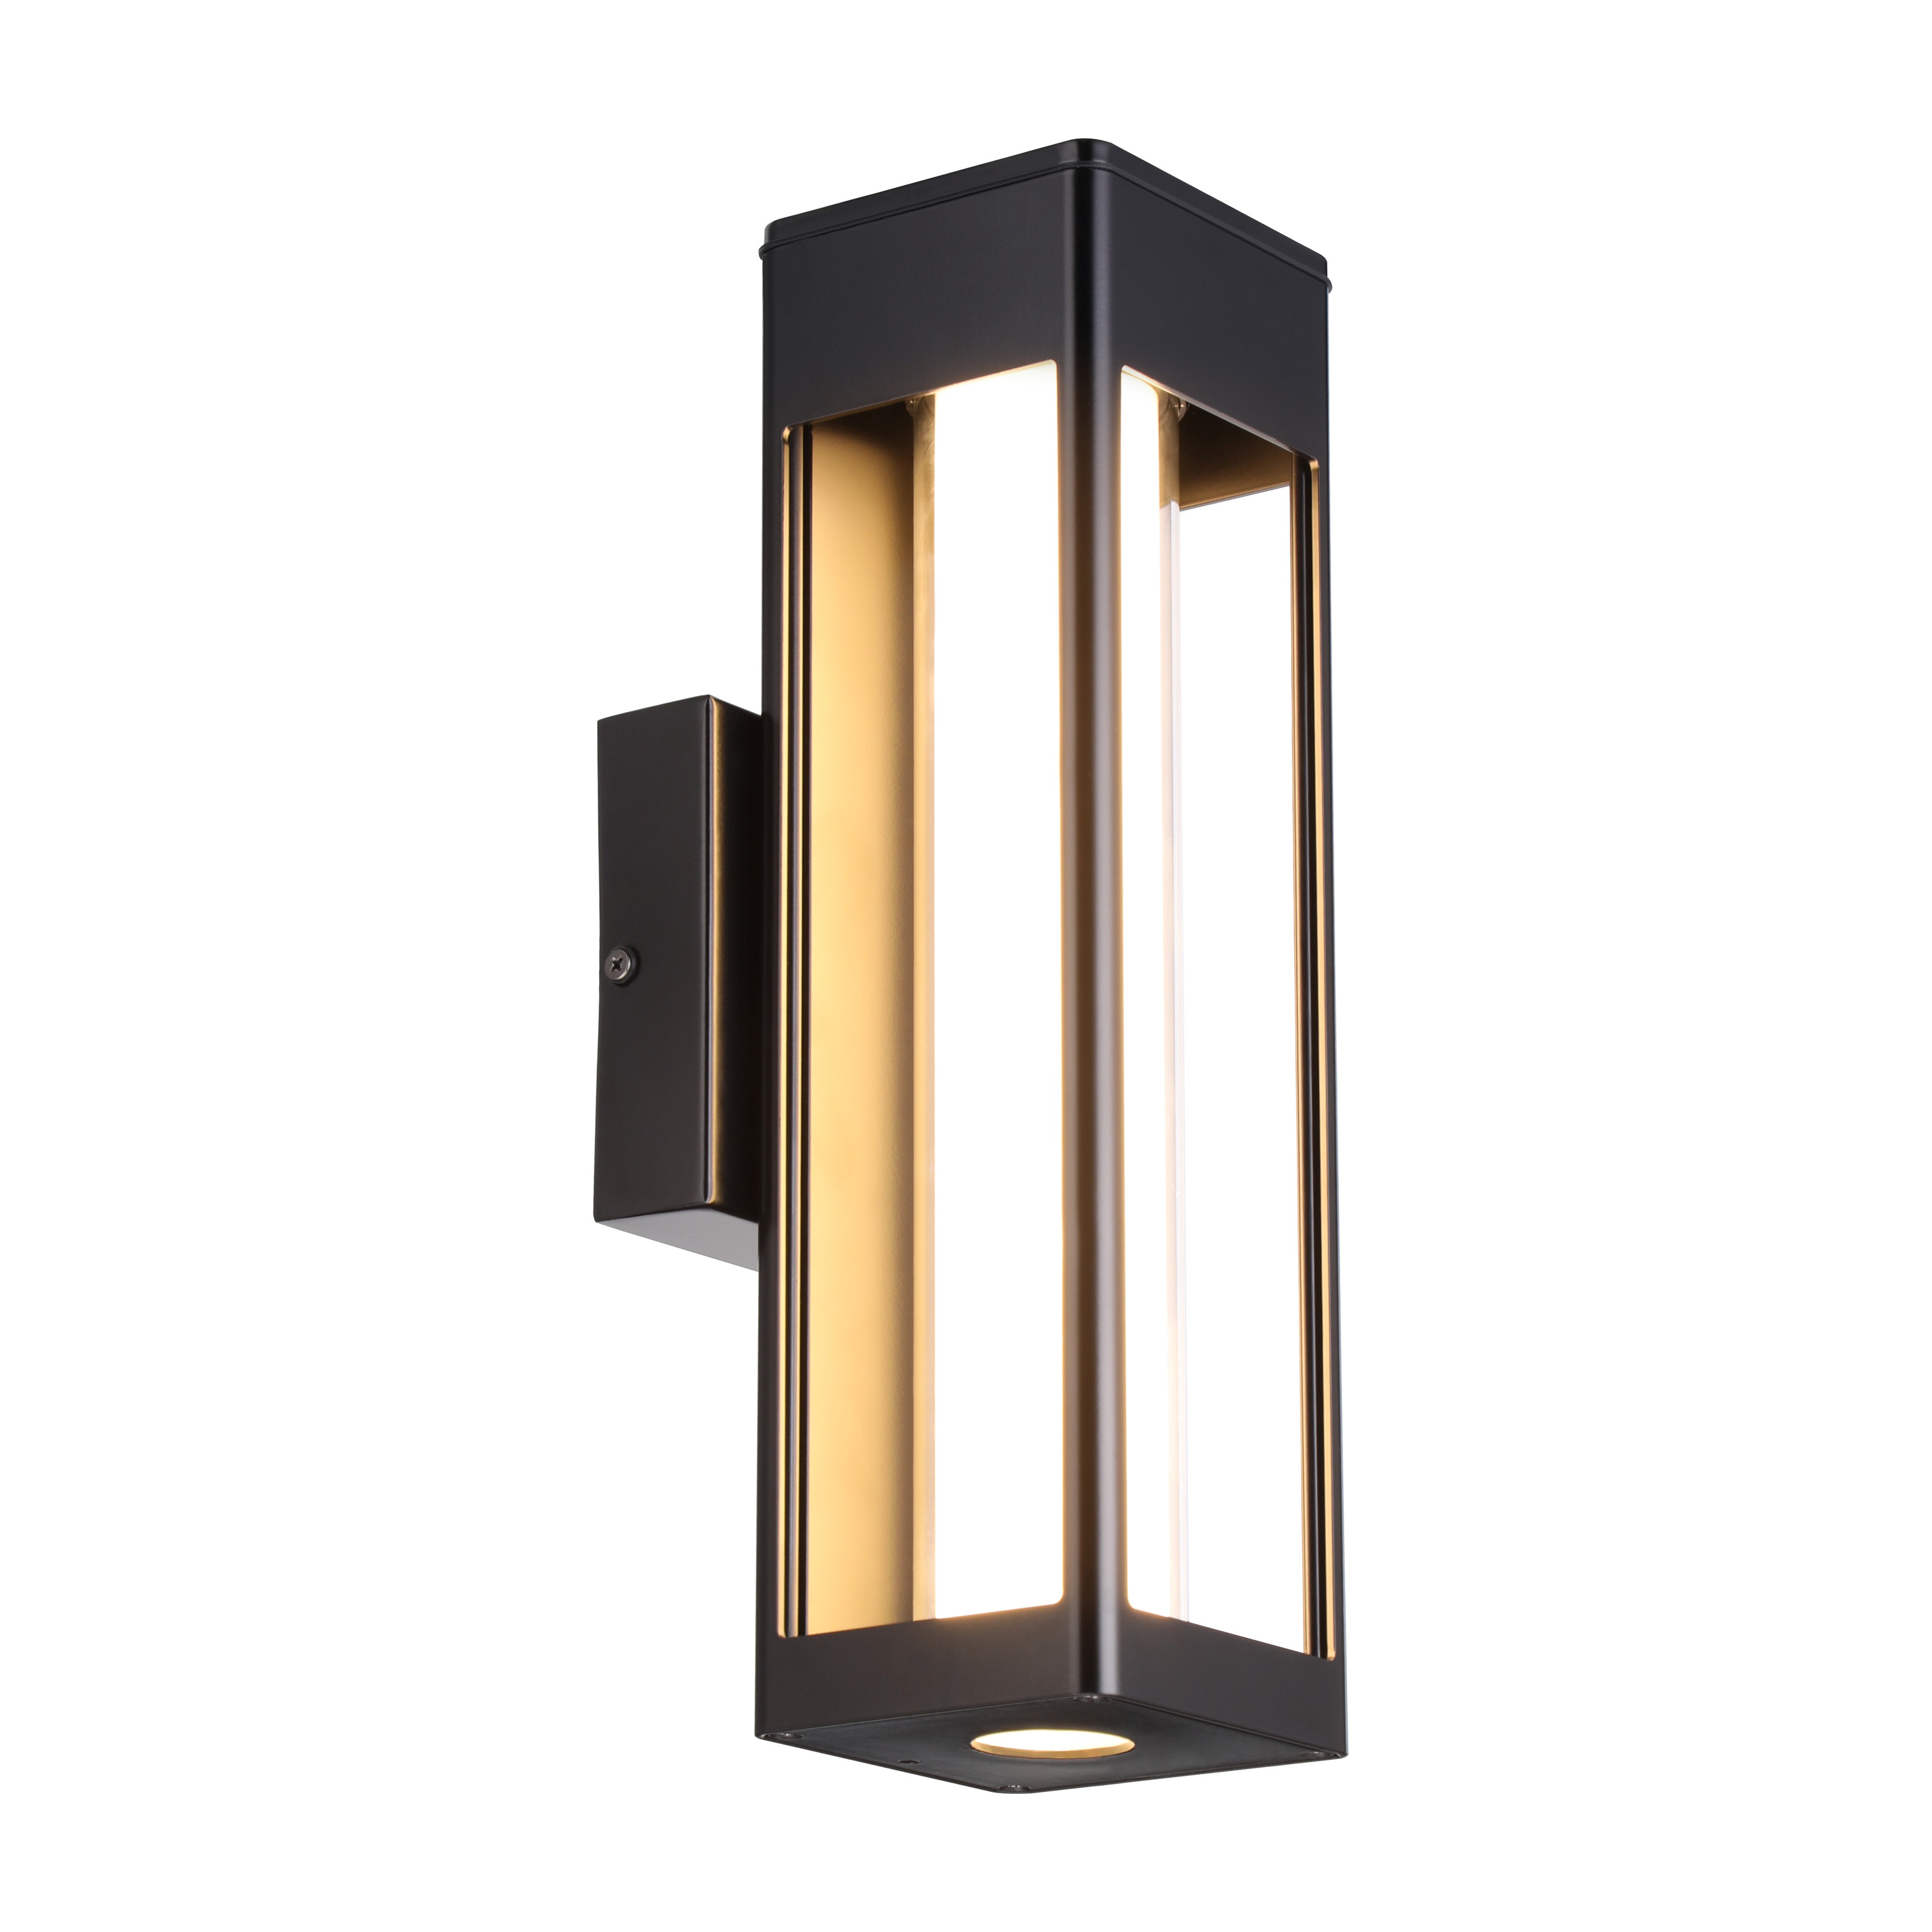 The exRelic 12W Outdoor Wall Sconce